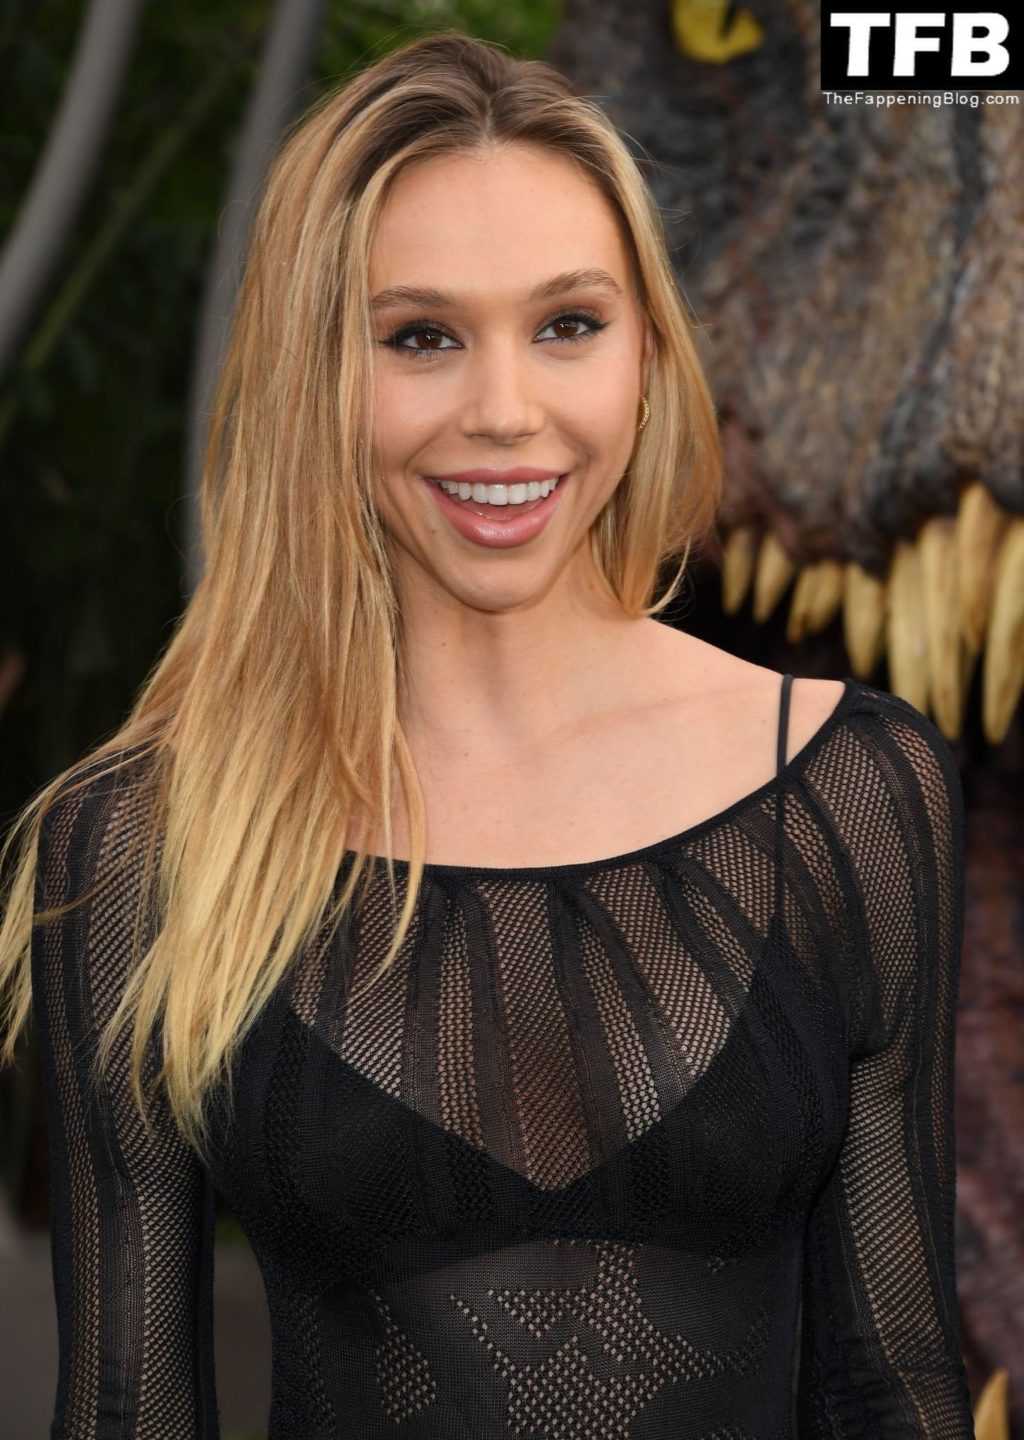 Alexis Ren Sexy The Fappening Blog 17 1024x1440 - Alexis Ren Displays Her Slender Figure in a See-Through Dress at the “Jurassic World: Dominion” Premiere (41 Photos)